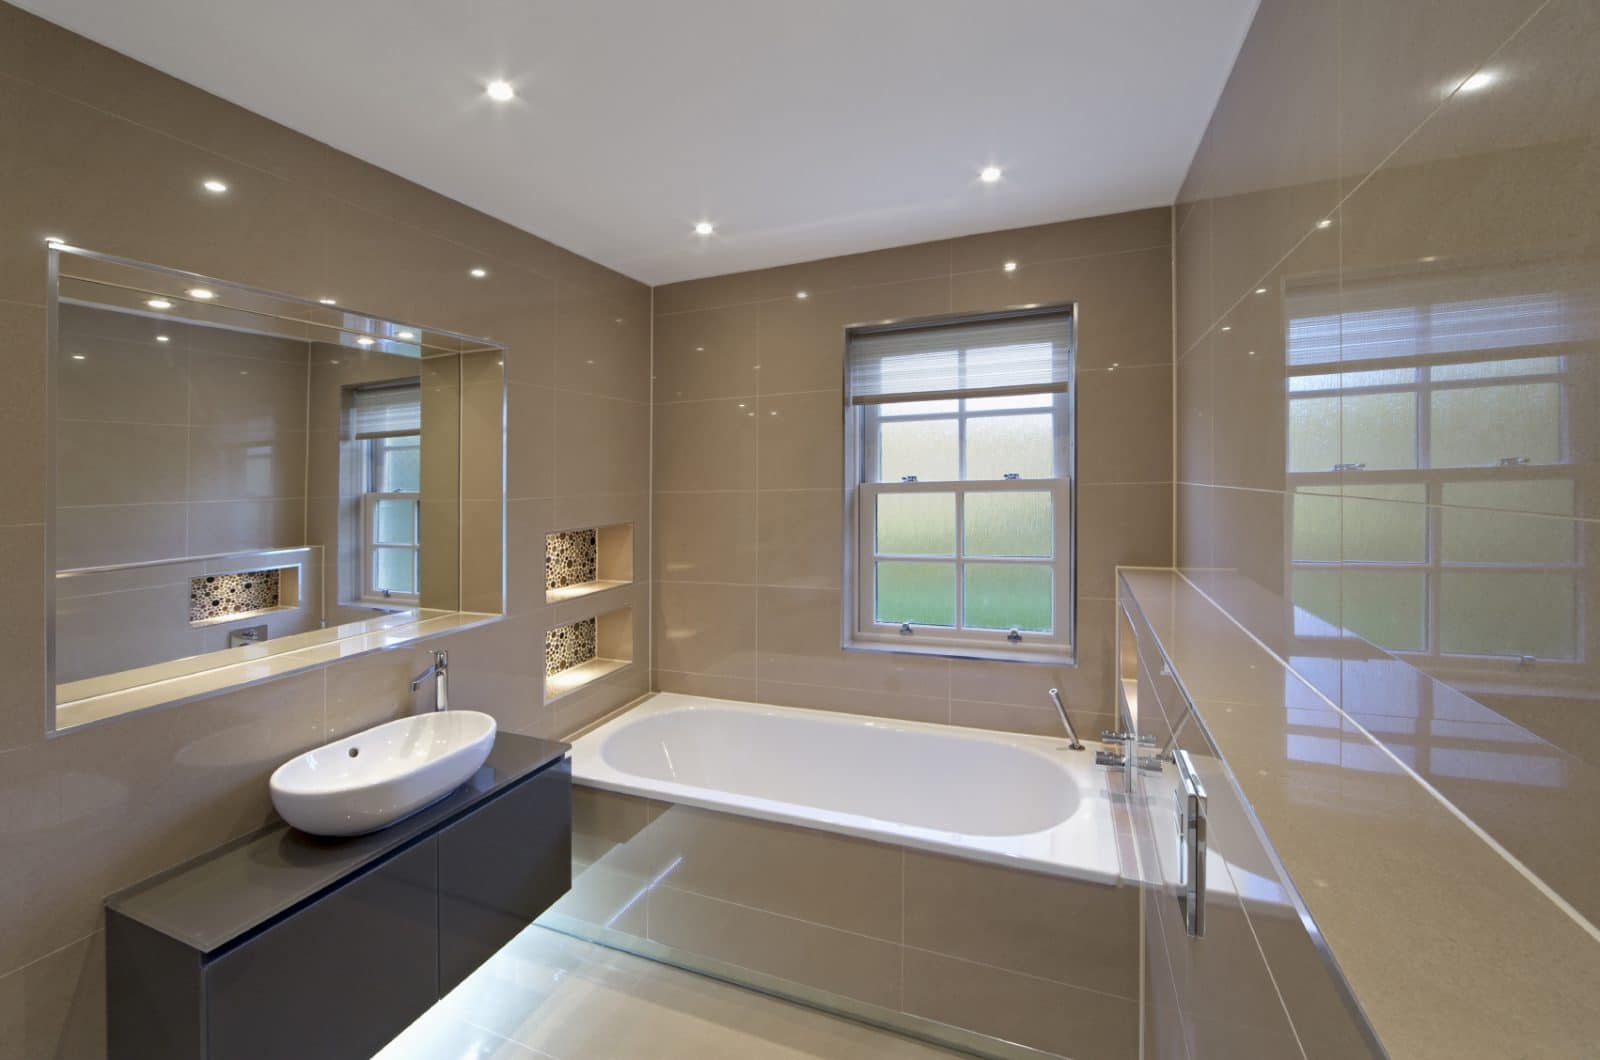 Bathroom Fitting Costs Homeforce, How Much Does It Cost To Redo A Bathroom Uk